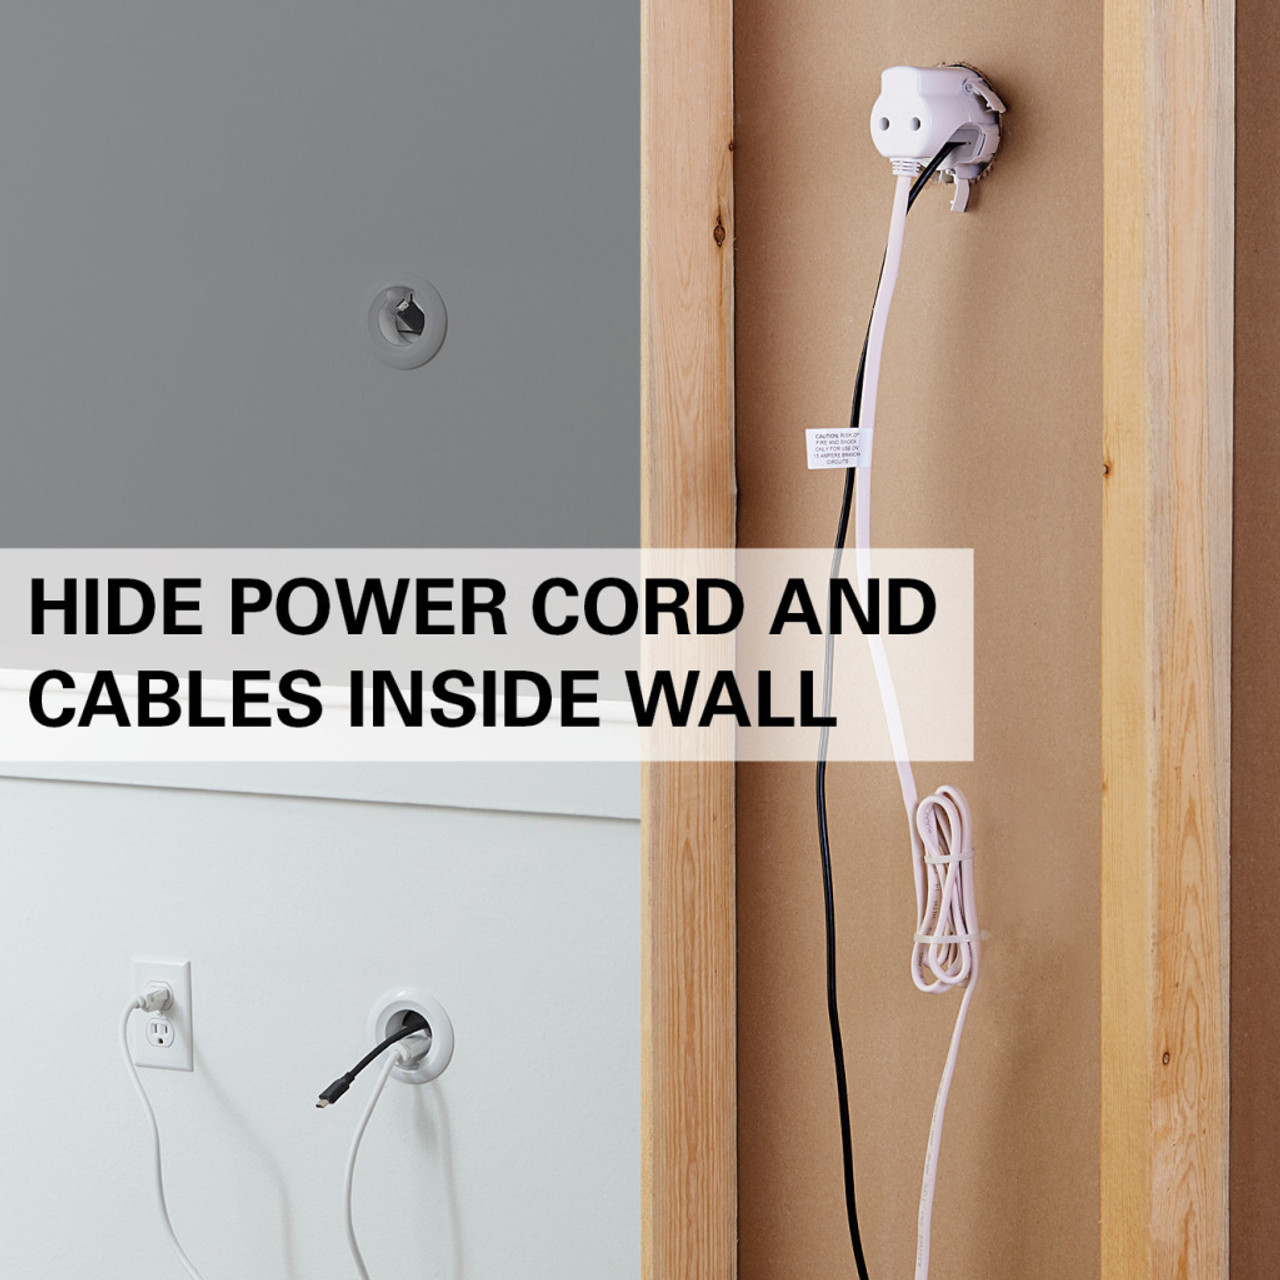  in Wall Cable Management Kit for TV - TV Cord Hider Kit, Cord  Hiders for TV on Wall, Wire Hiders for TV on Wall & Behind Wall TV Wire Kit  Cable